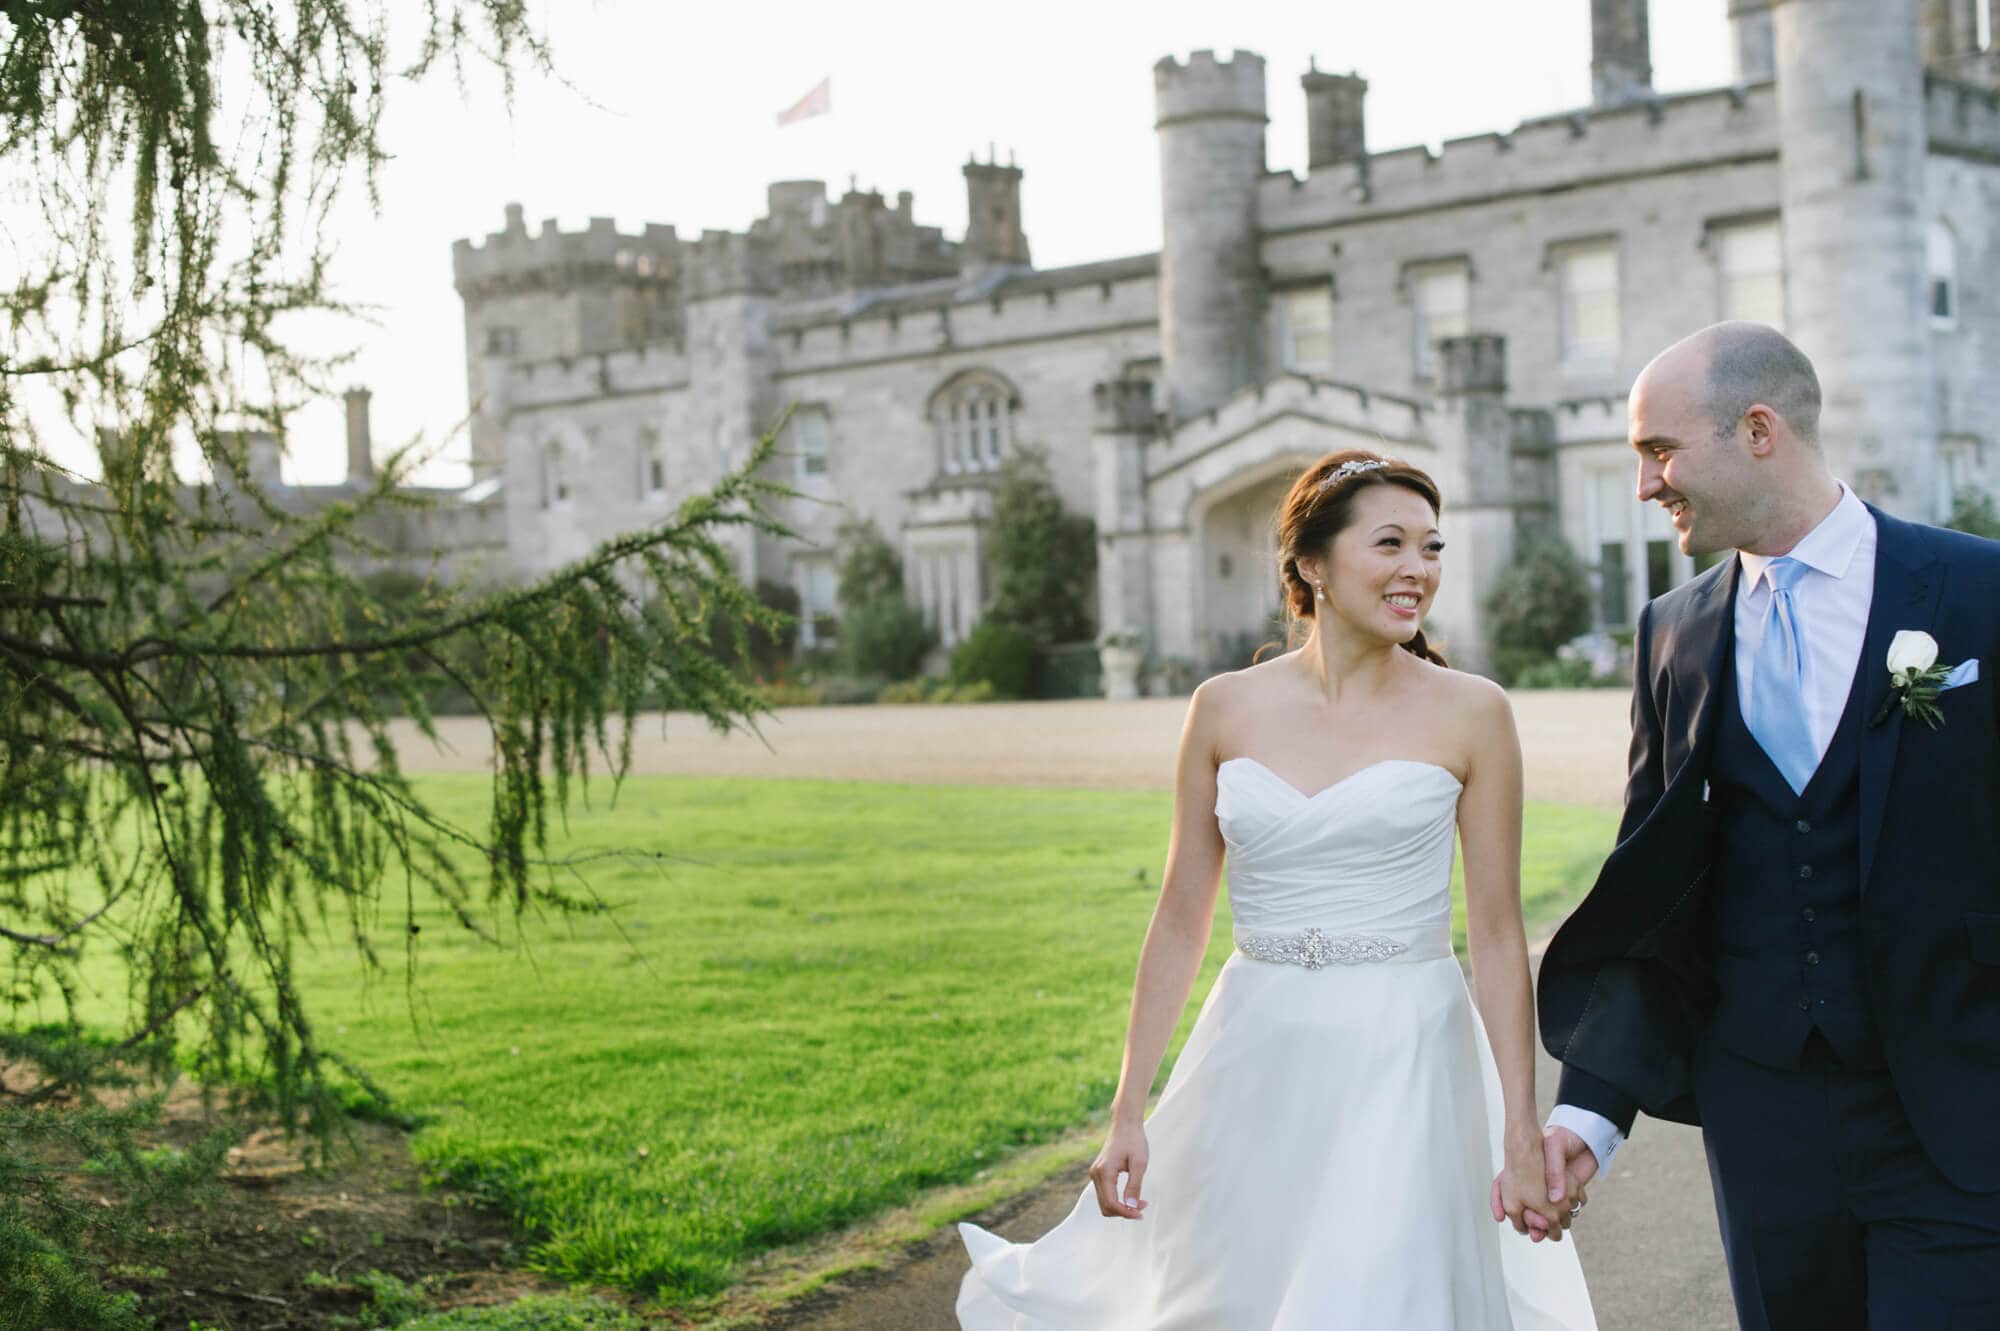 Chinese Wedding Packages, Dundas Castle, Weddings, wedding venue, edinburgh venue, edinbugh wedding venue, events, private dining